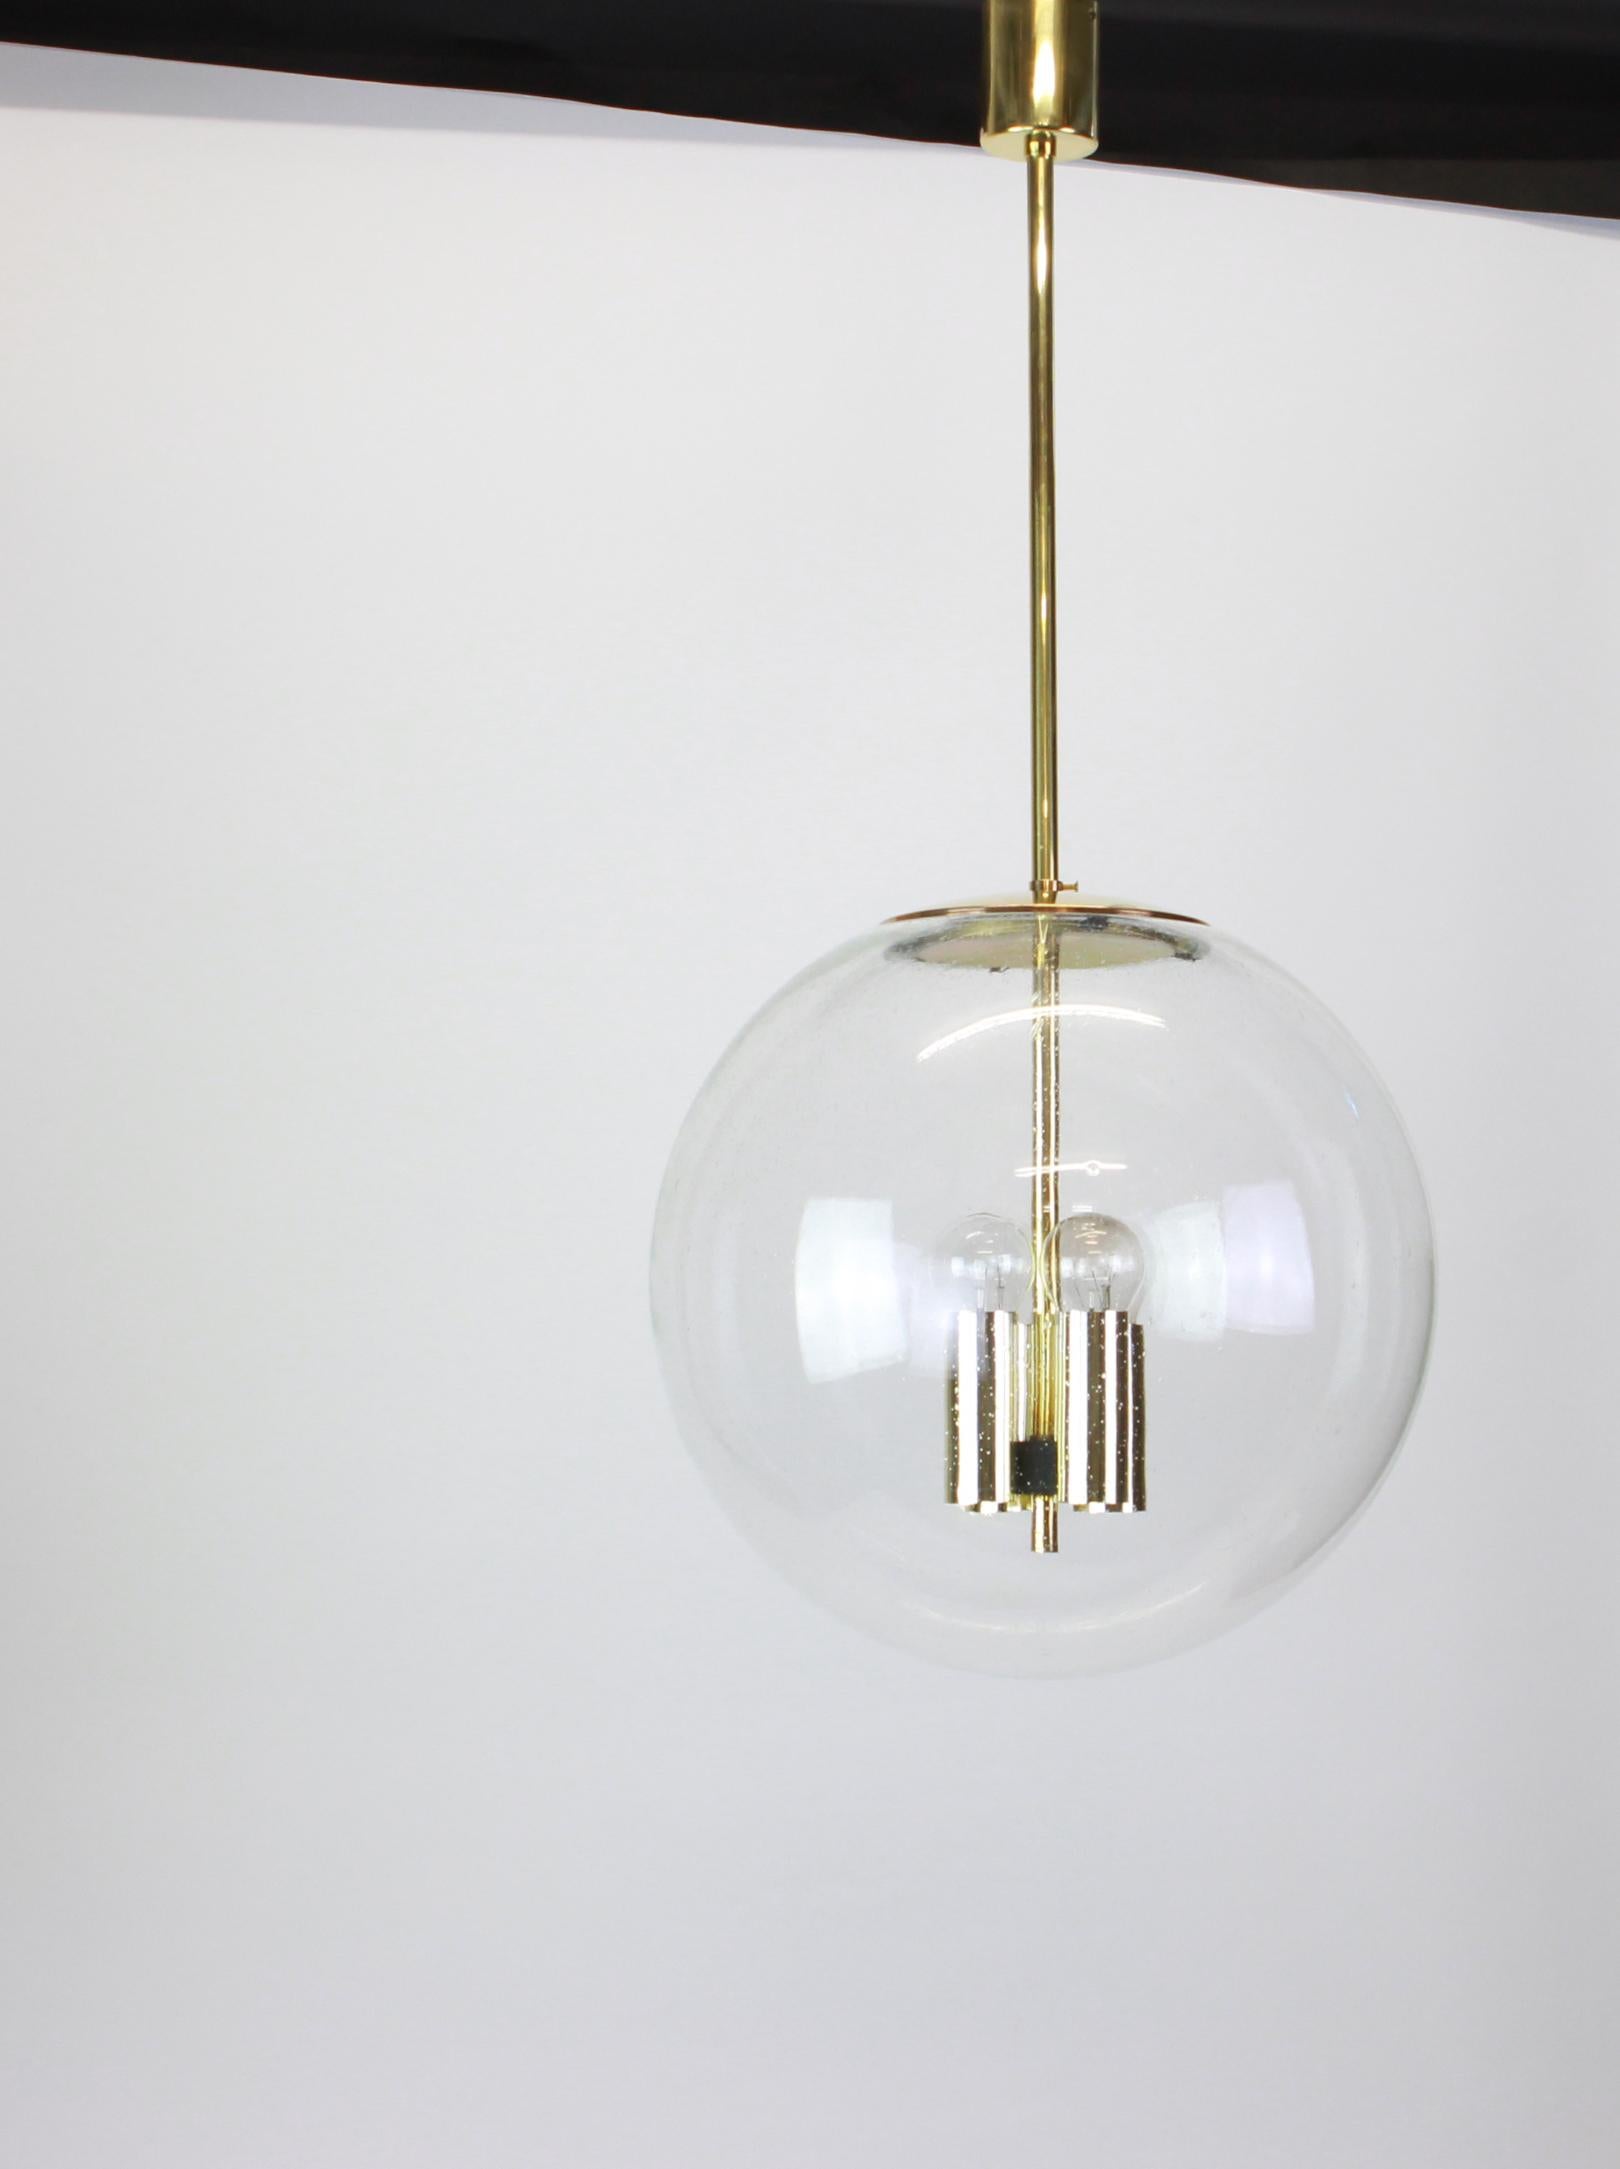 Large mouth-blown glass ball pendant, manufactured by Limburg, Germany, circa 1970-1979.

Sockets: 4 x E27 standard bulb and function on a voltage from 110 till 240 volts. (for USA - UK - etc..).
Drop rod can be adjusted as required, free of